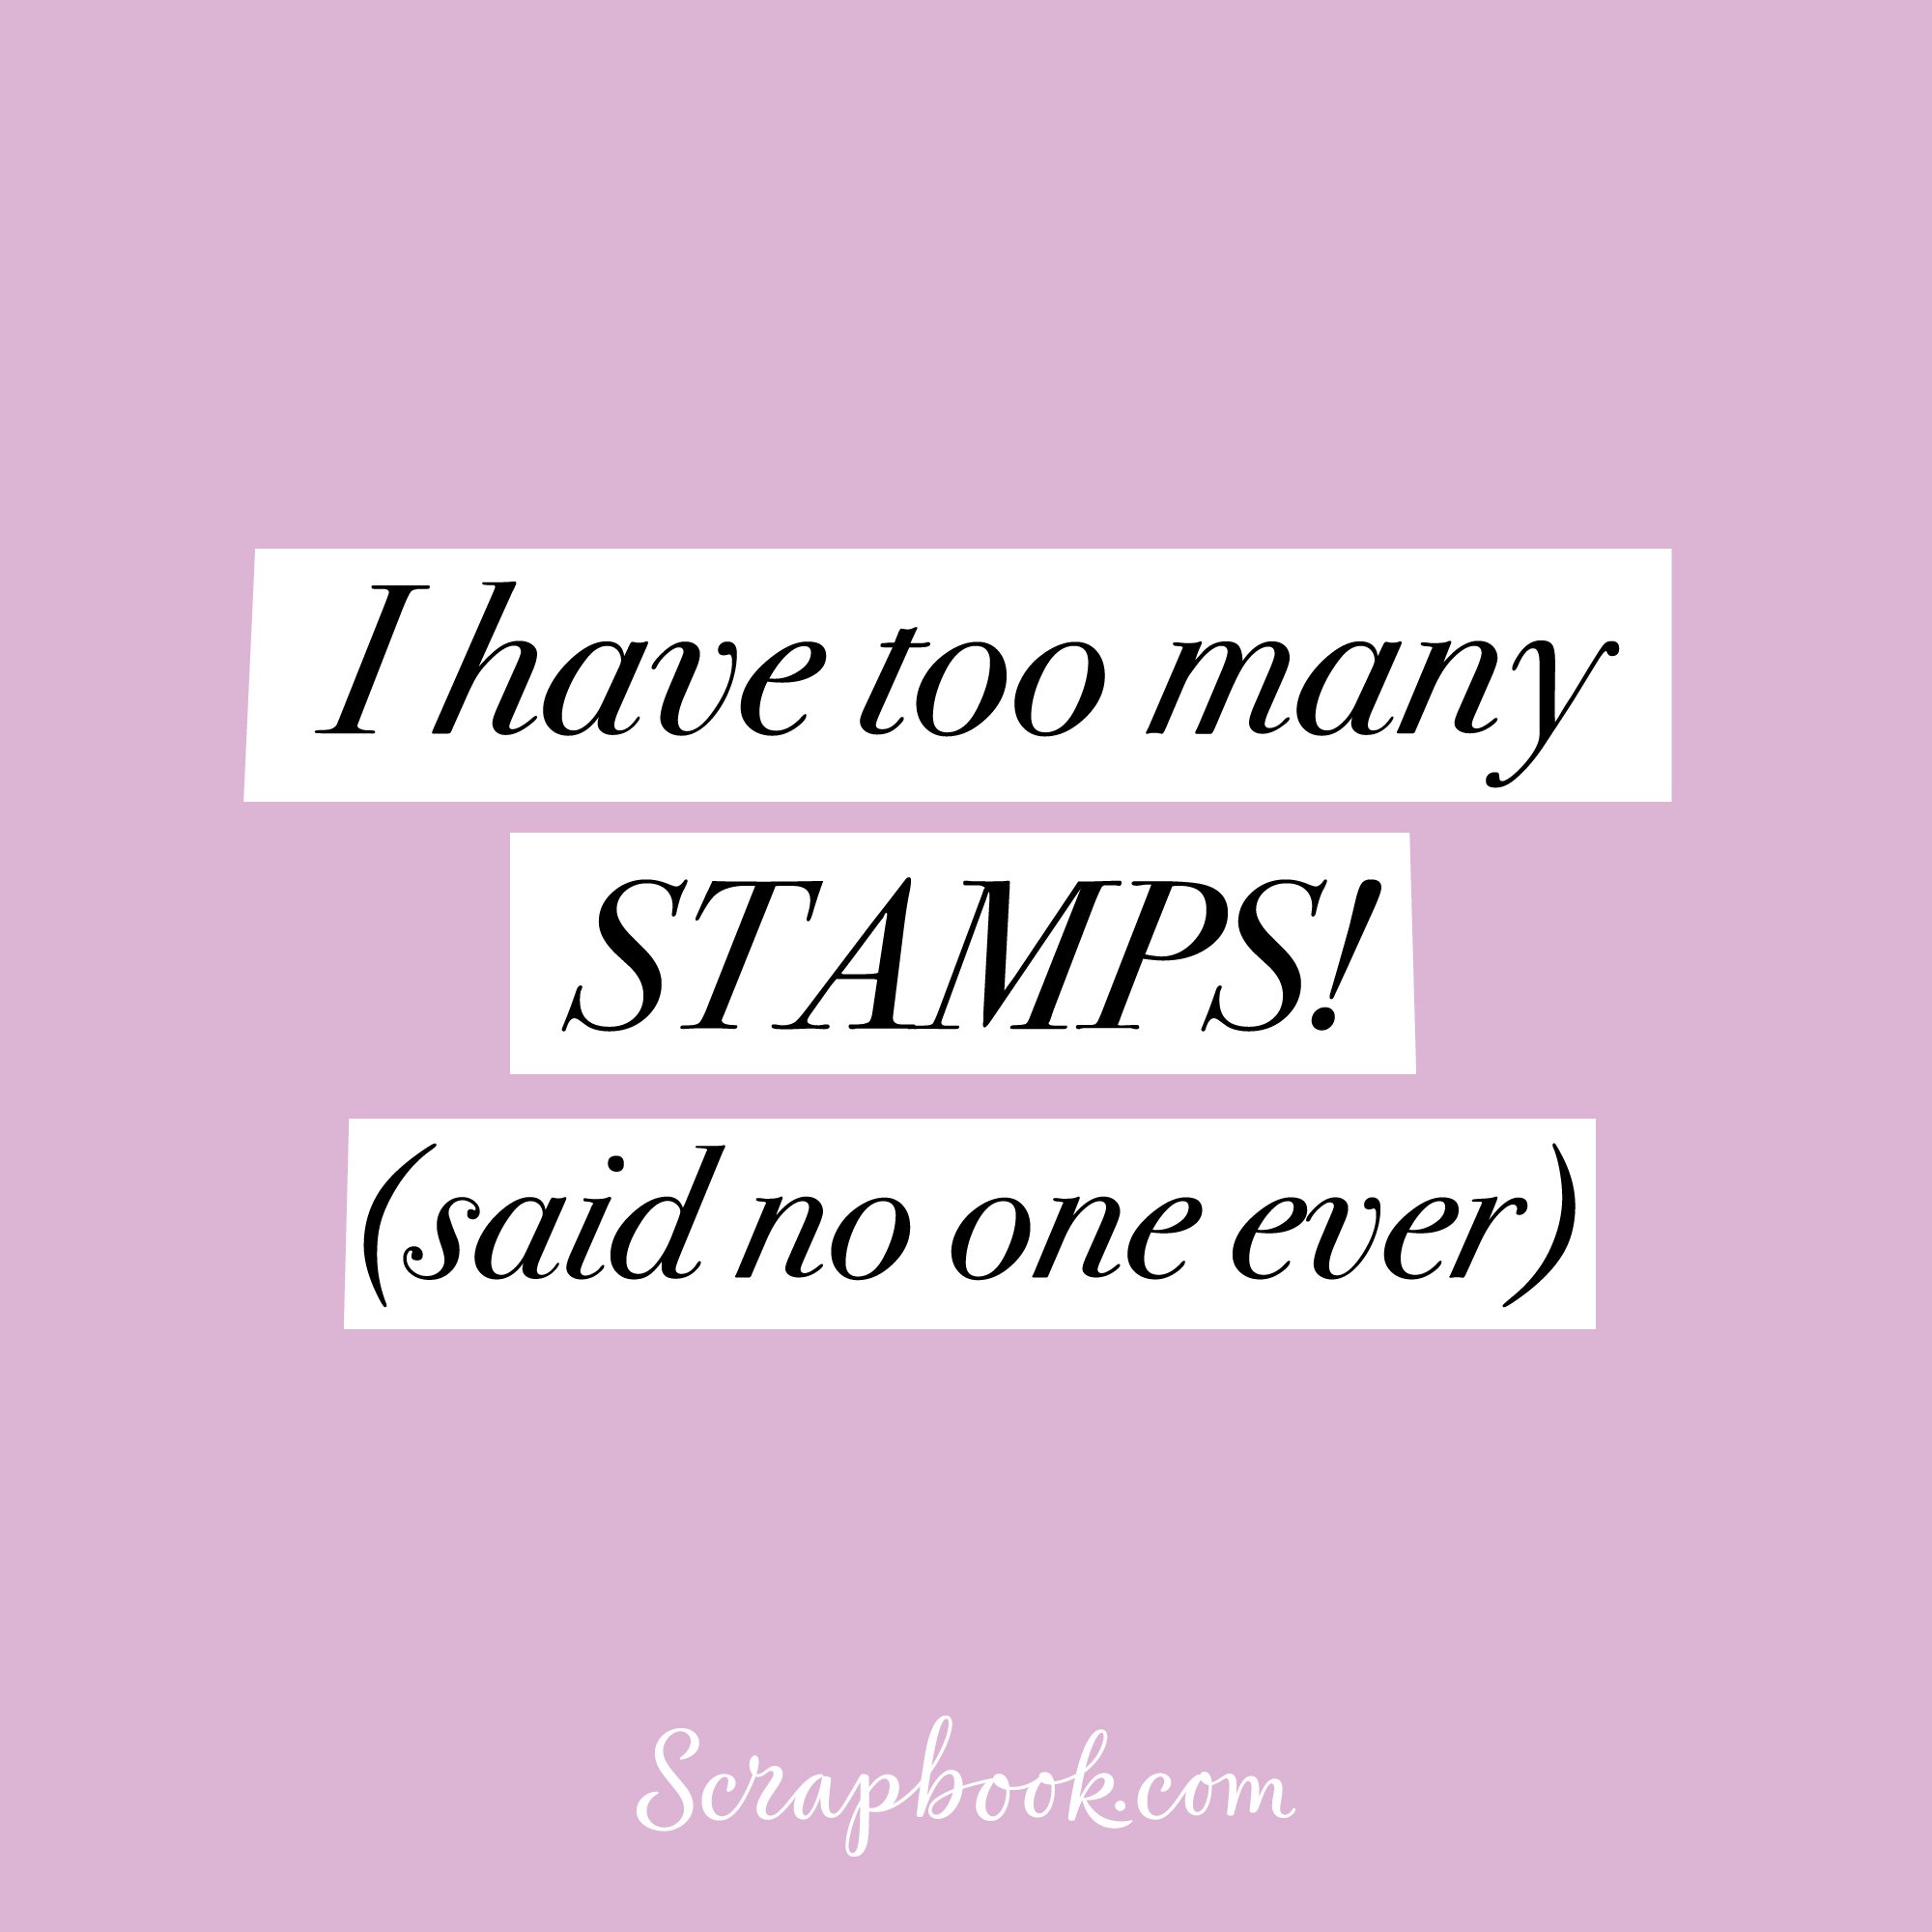 I have too many STAMPS! (said no one ever)